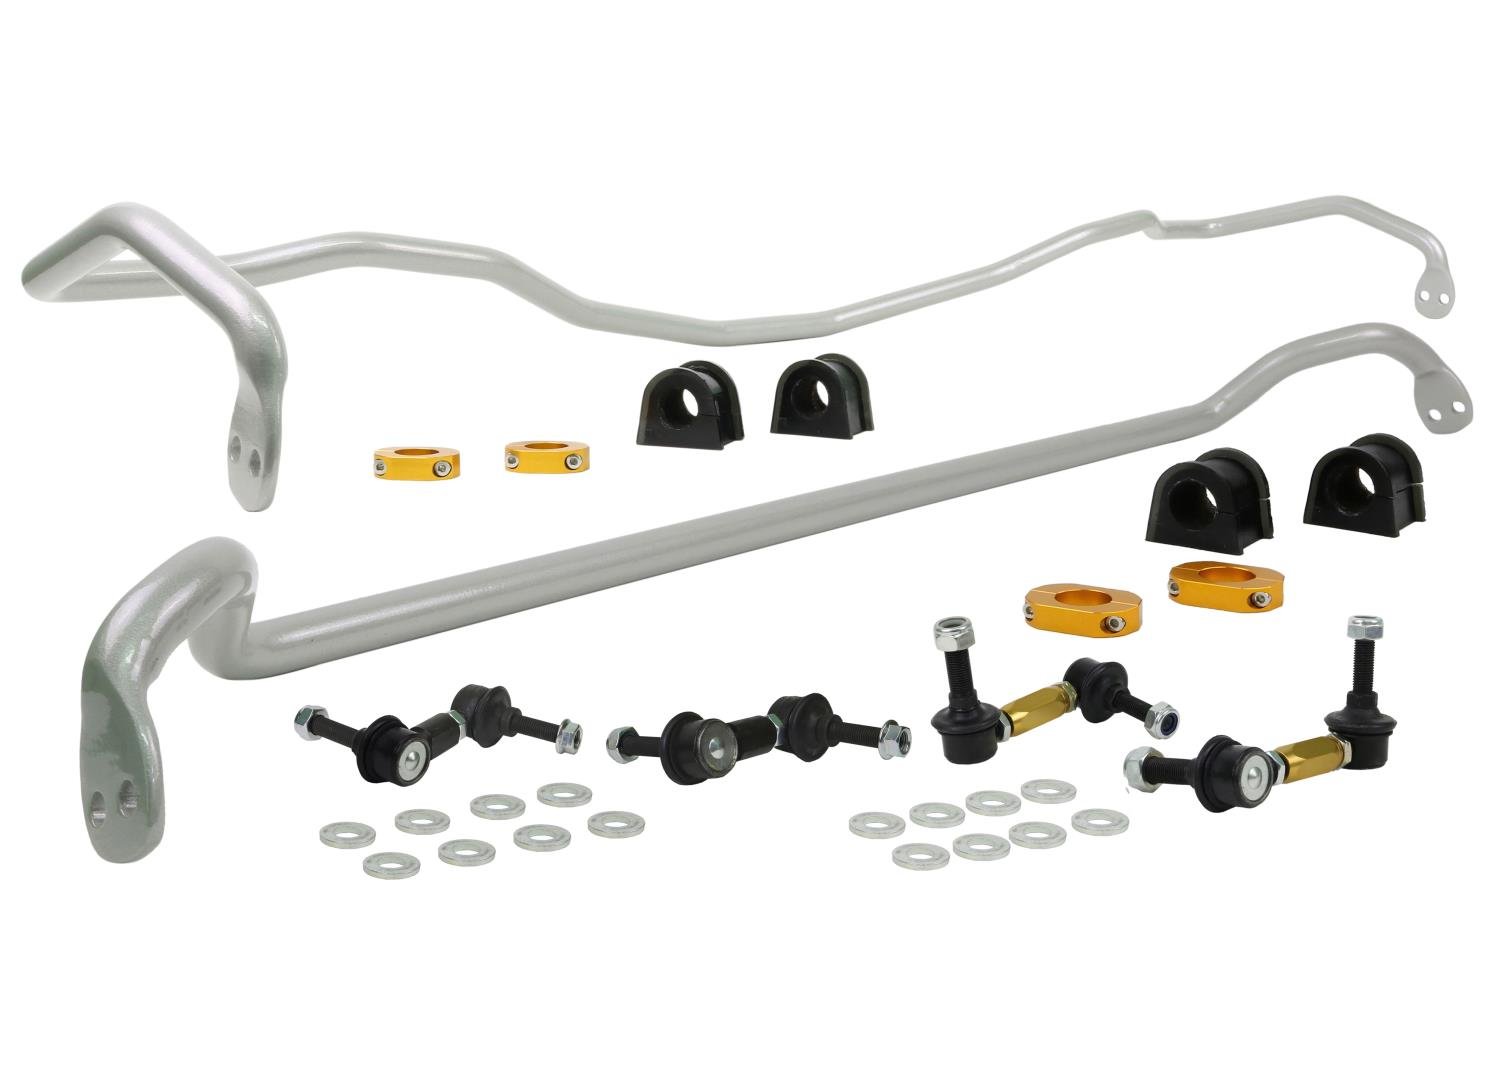 BSK014 Front and Rear Sway Bar Assembly Kit for 2005-2006 Subaru Legacy, 2006-2009 Legacy Spec.B